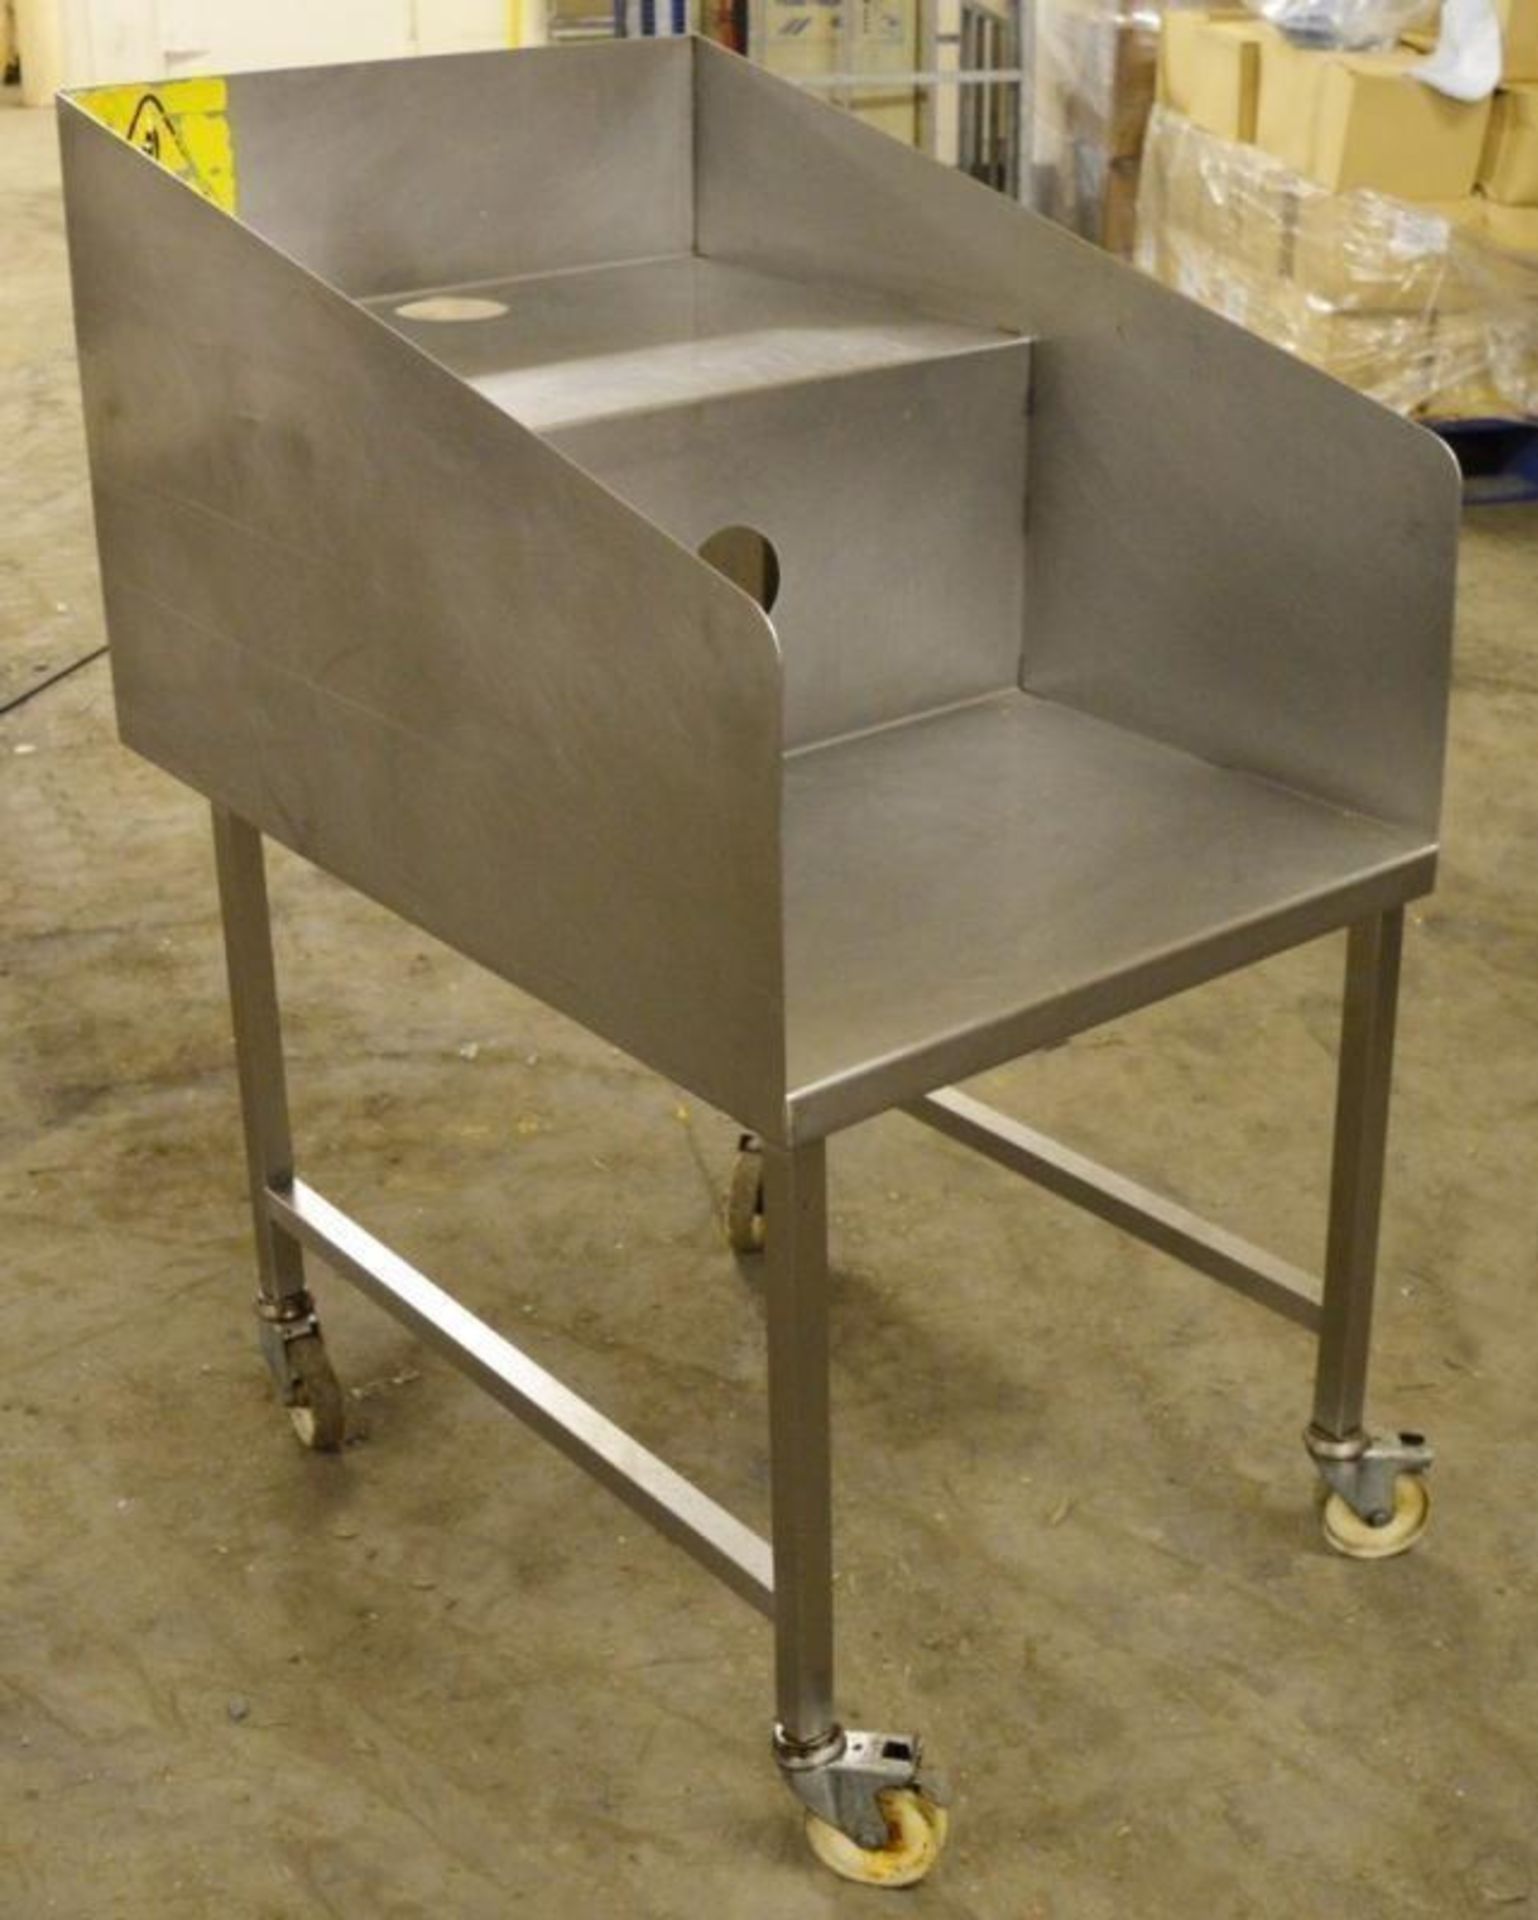 1 x Stainless Steel Commercial Waste Bench - Two Tier Waste Chute on Castors - H114 x W62.5 x D90 cm - Bild 3 aus 5